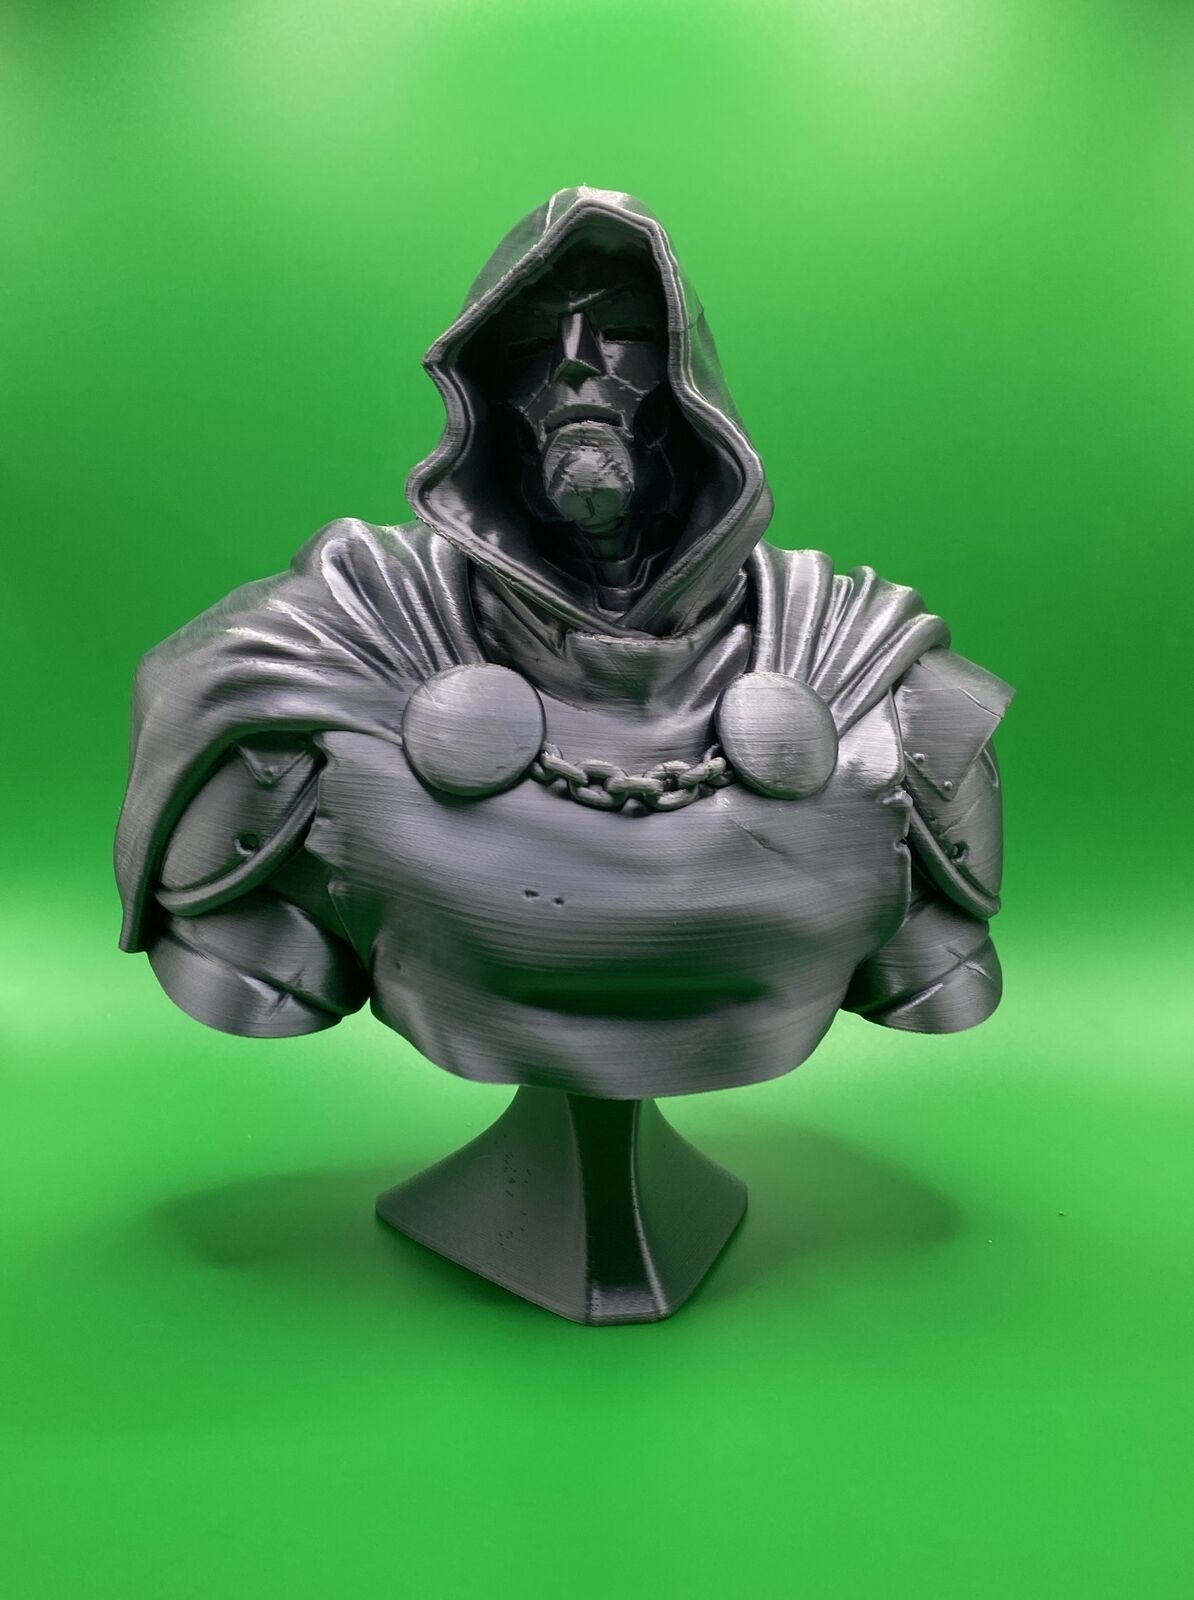 Doctor Doom Statue | 3D Printed | Paintable Plastic Filament | 7 Inches Tall